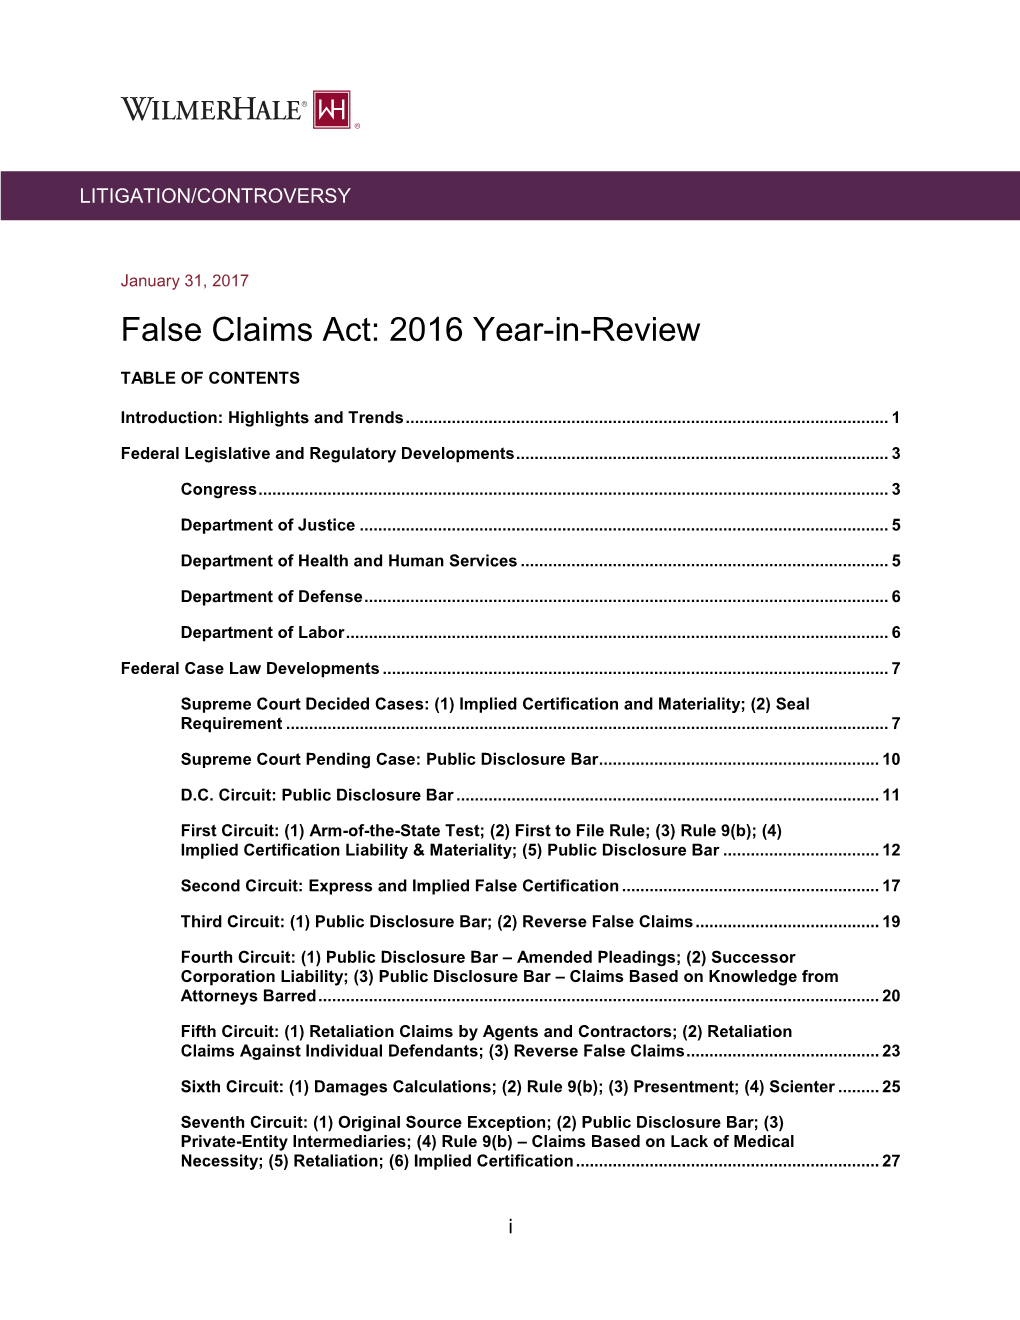 False Claims Act: 2016 Year-In-Review